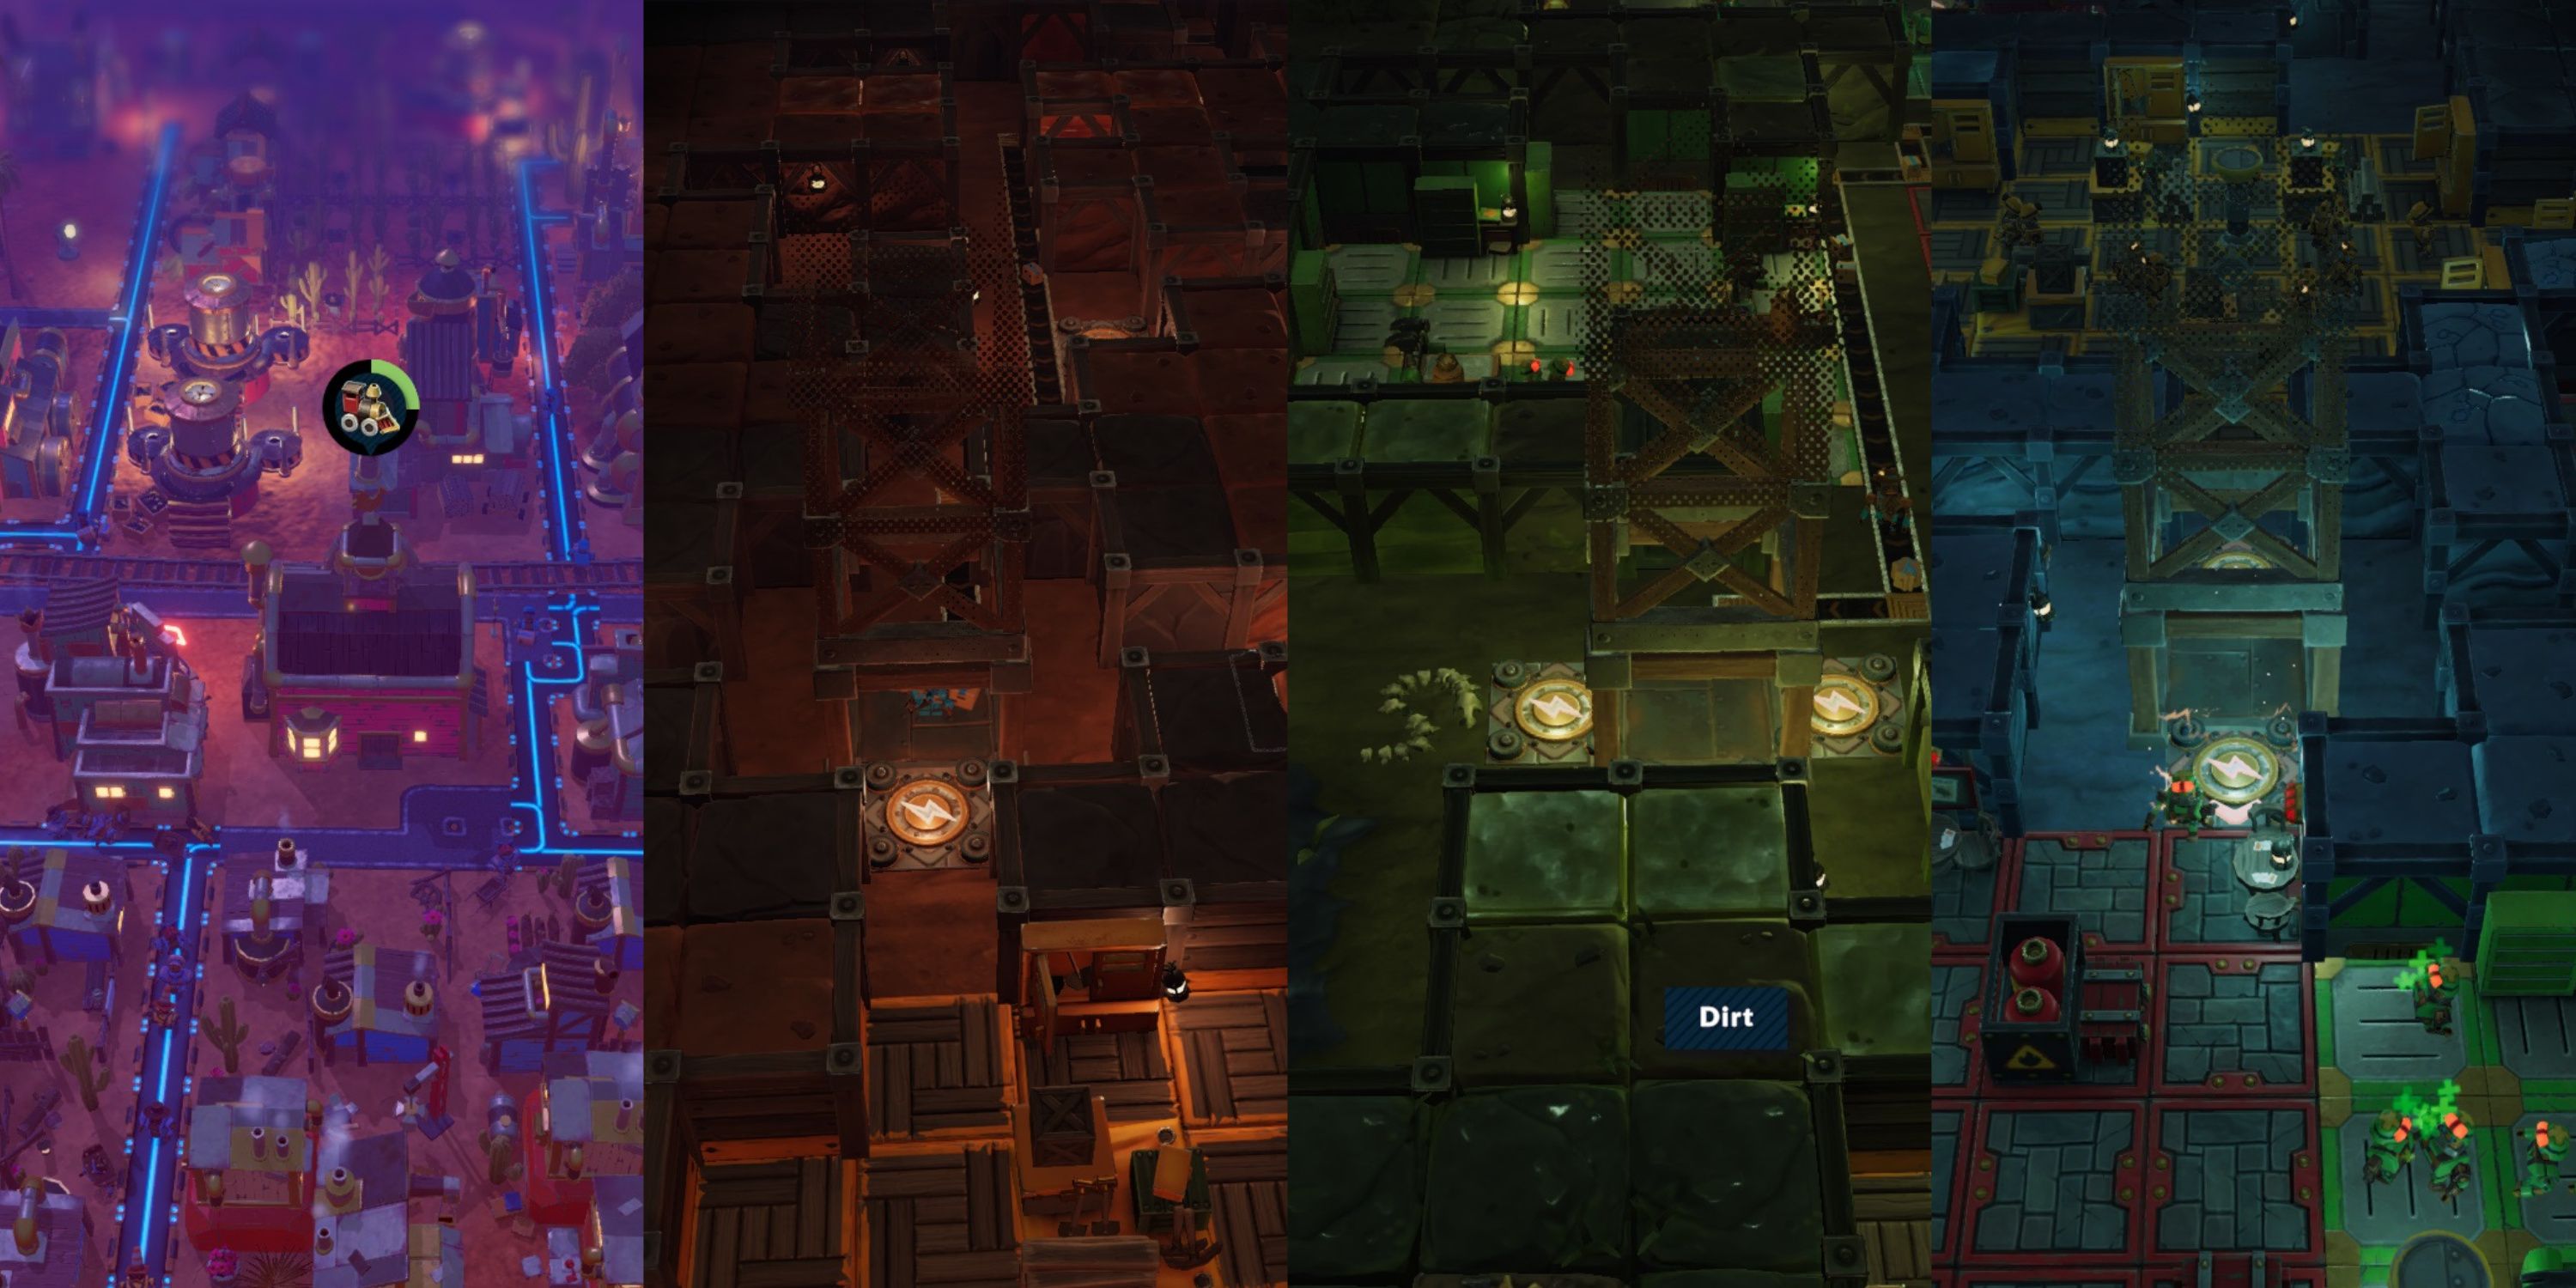 The layers of Steamworld Build. Left to right: Surface, Dusty Caverns, Marshy Ruins, Crackling Depths